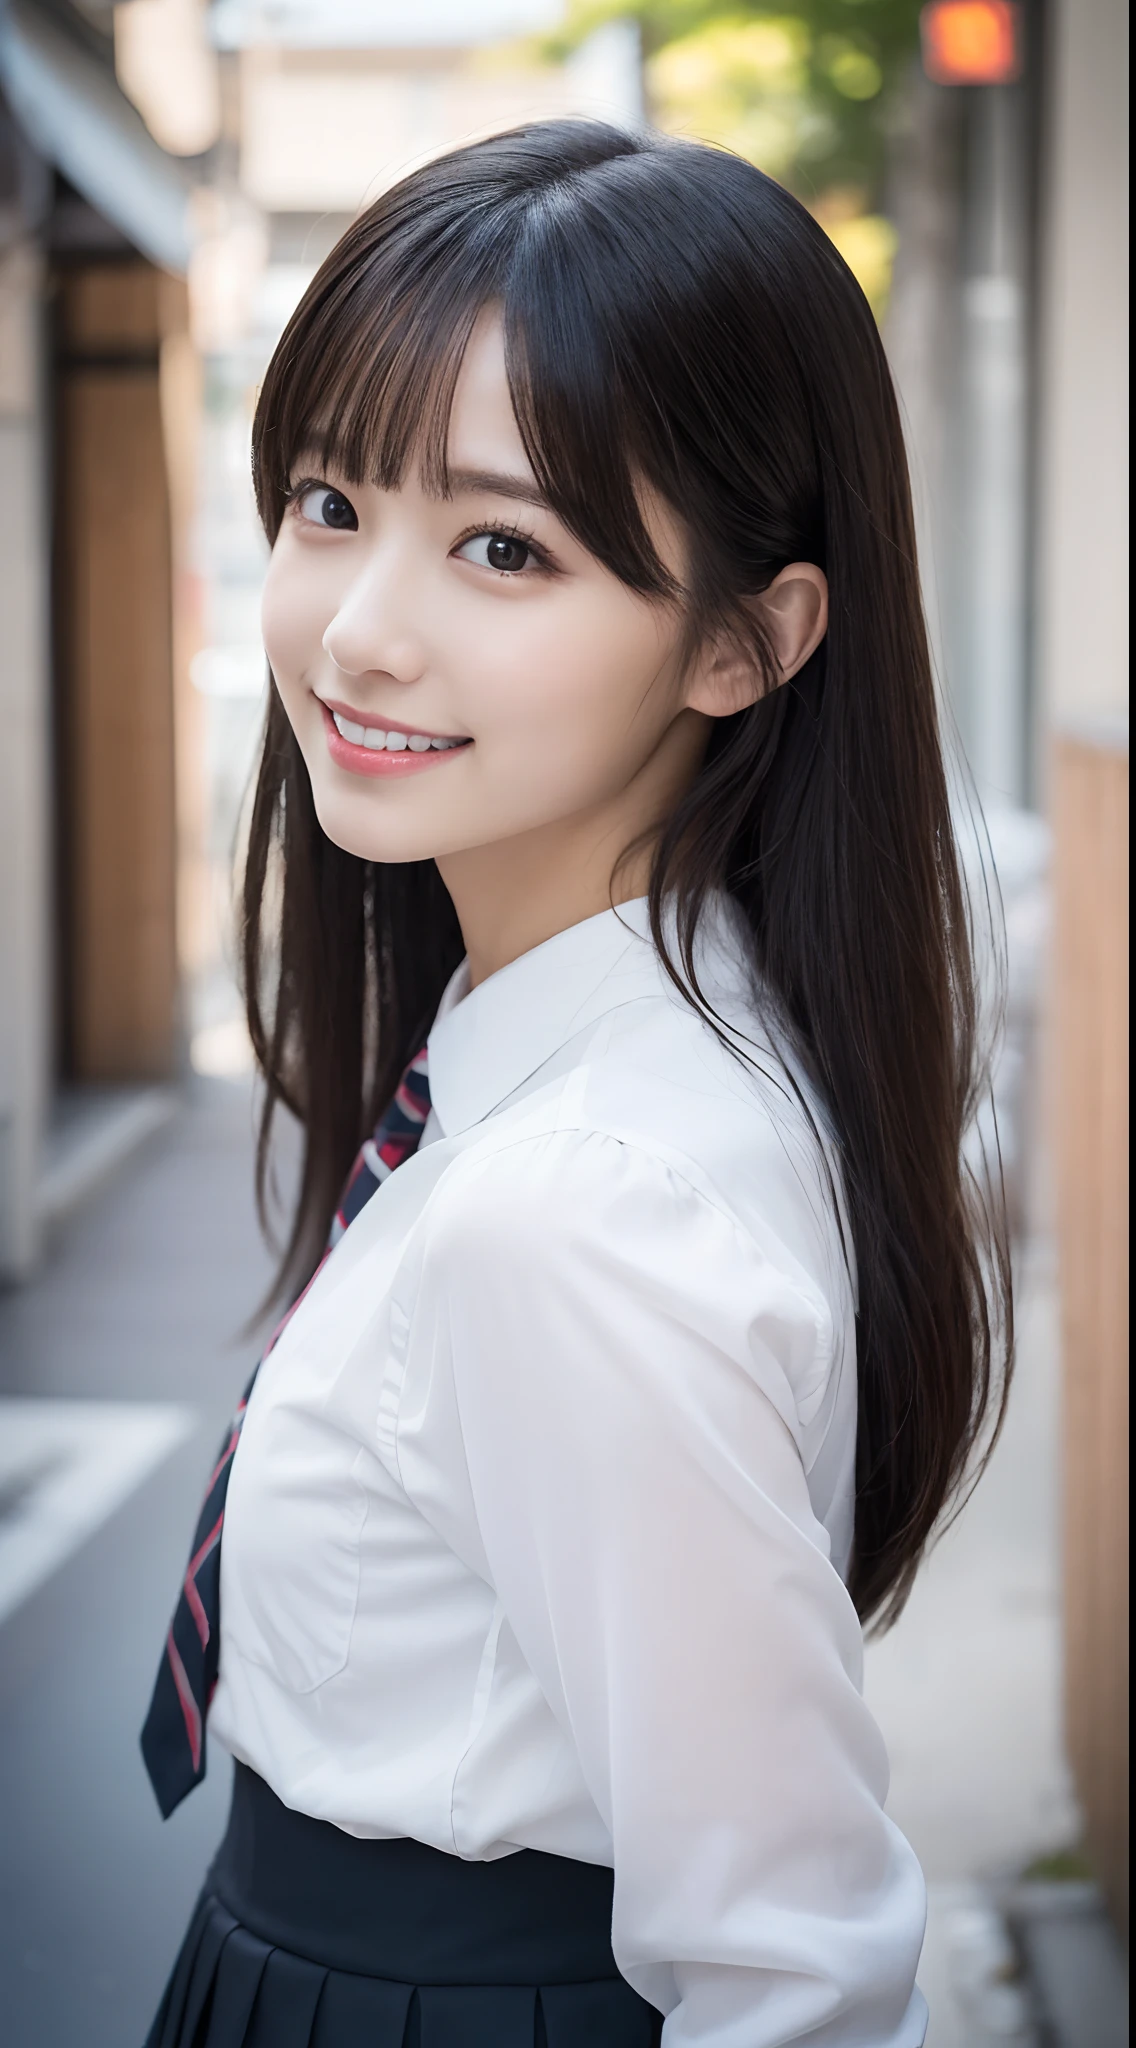 masutepiece, Photorealistic, detail, Beautiful black hair、swept bangs、Glamorous,Super beauty、Appeal、looking happy smile、well-styled、((8K, Raw photo)), Japan High School 、a taring at the viewer　Frontal shot